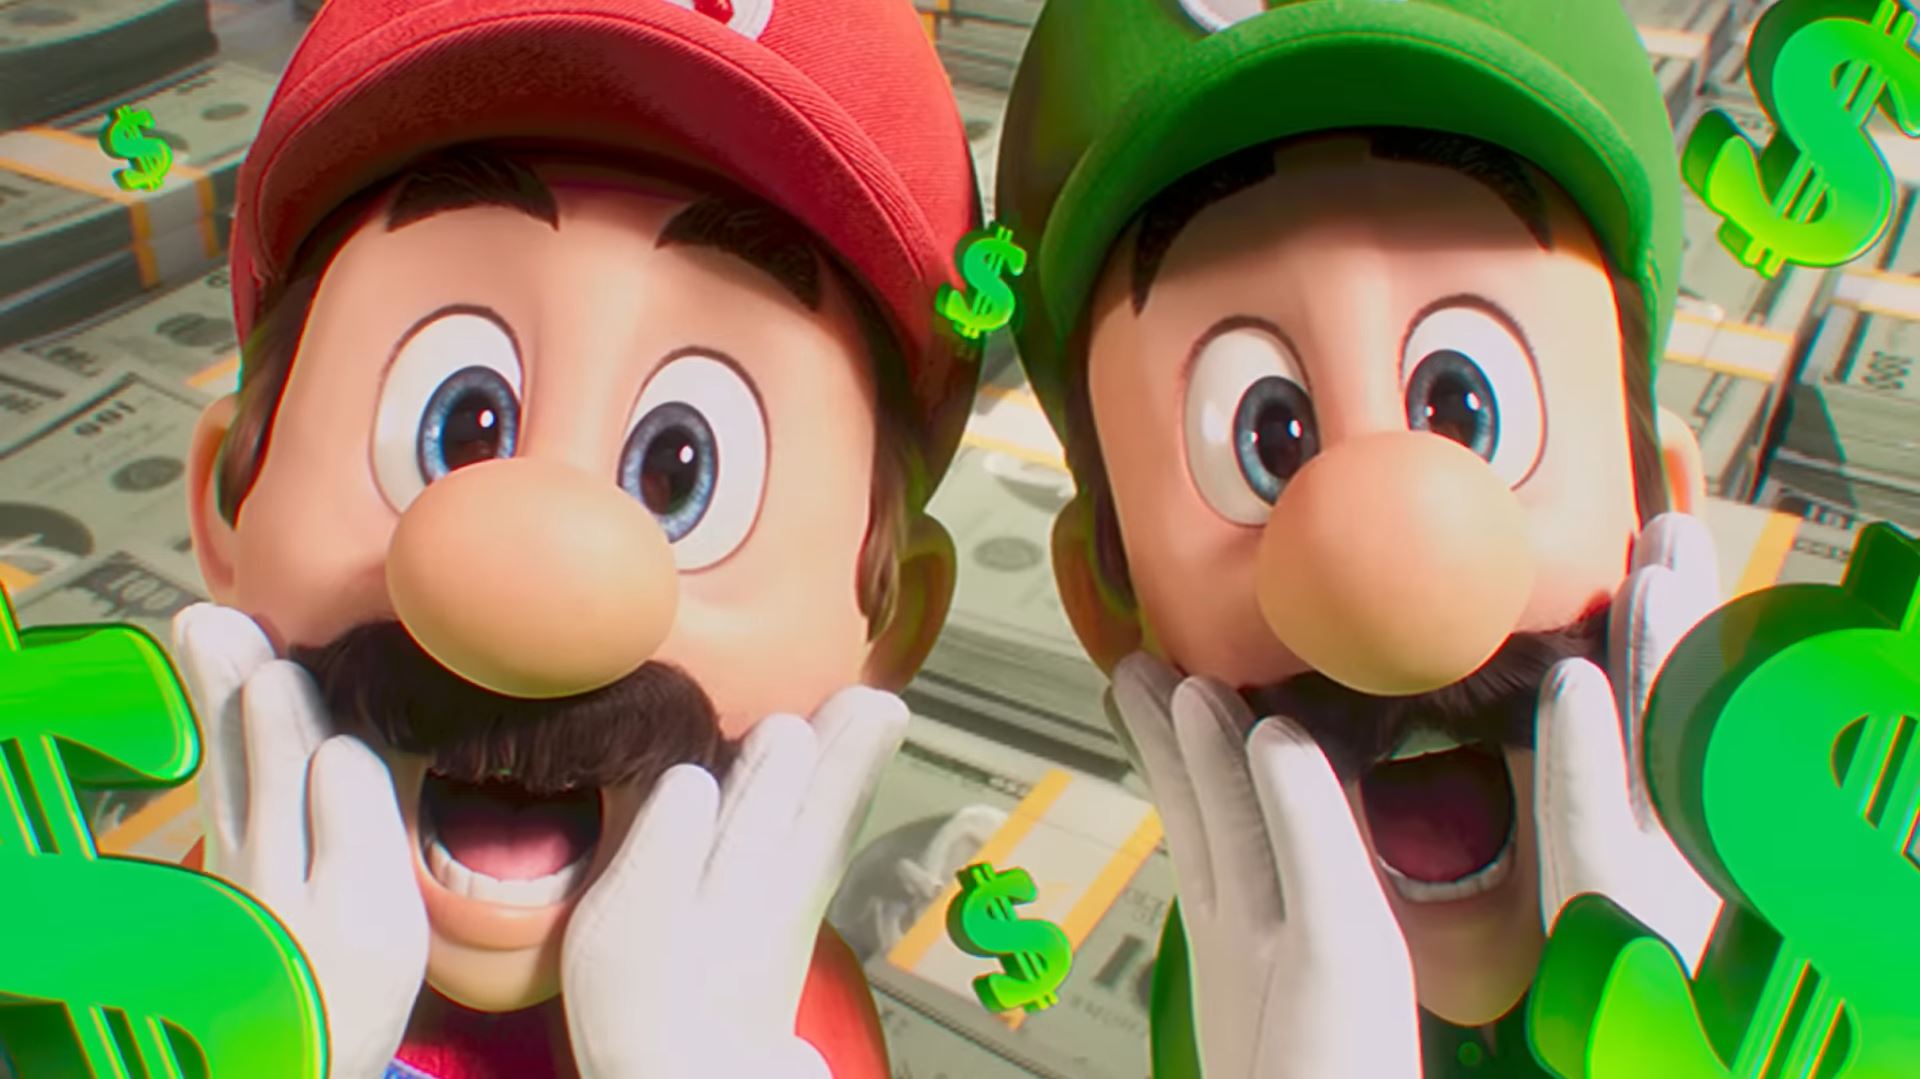 The Super Mario Bros. Movie is now the second highest grossing animated film of all time